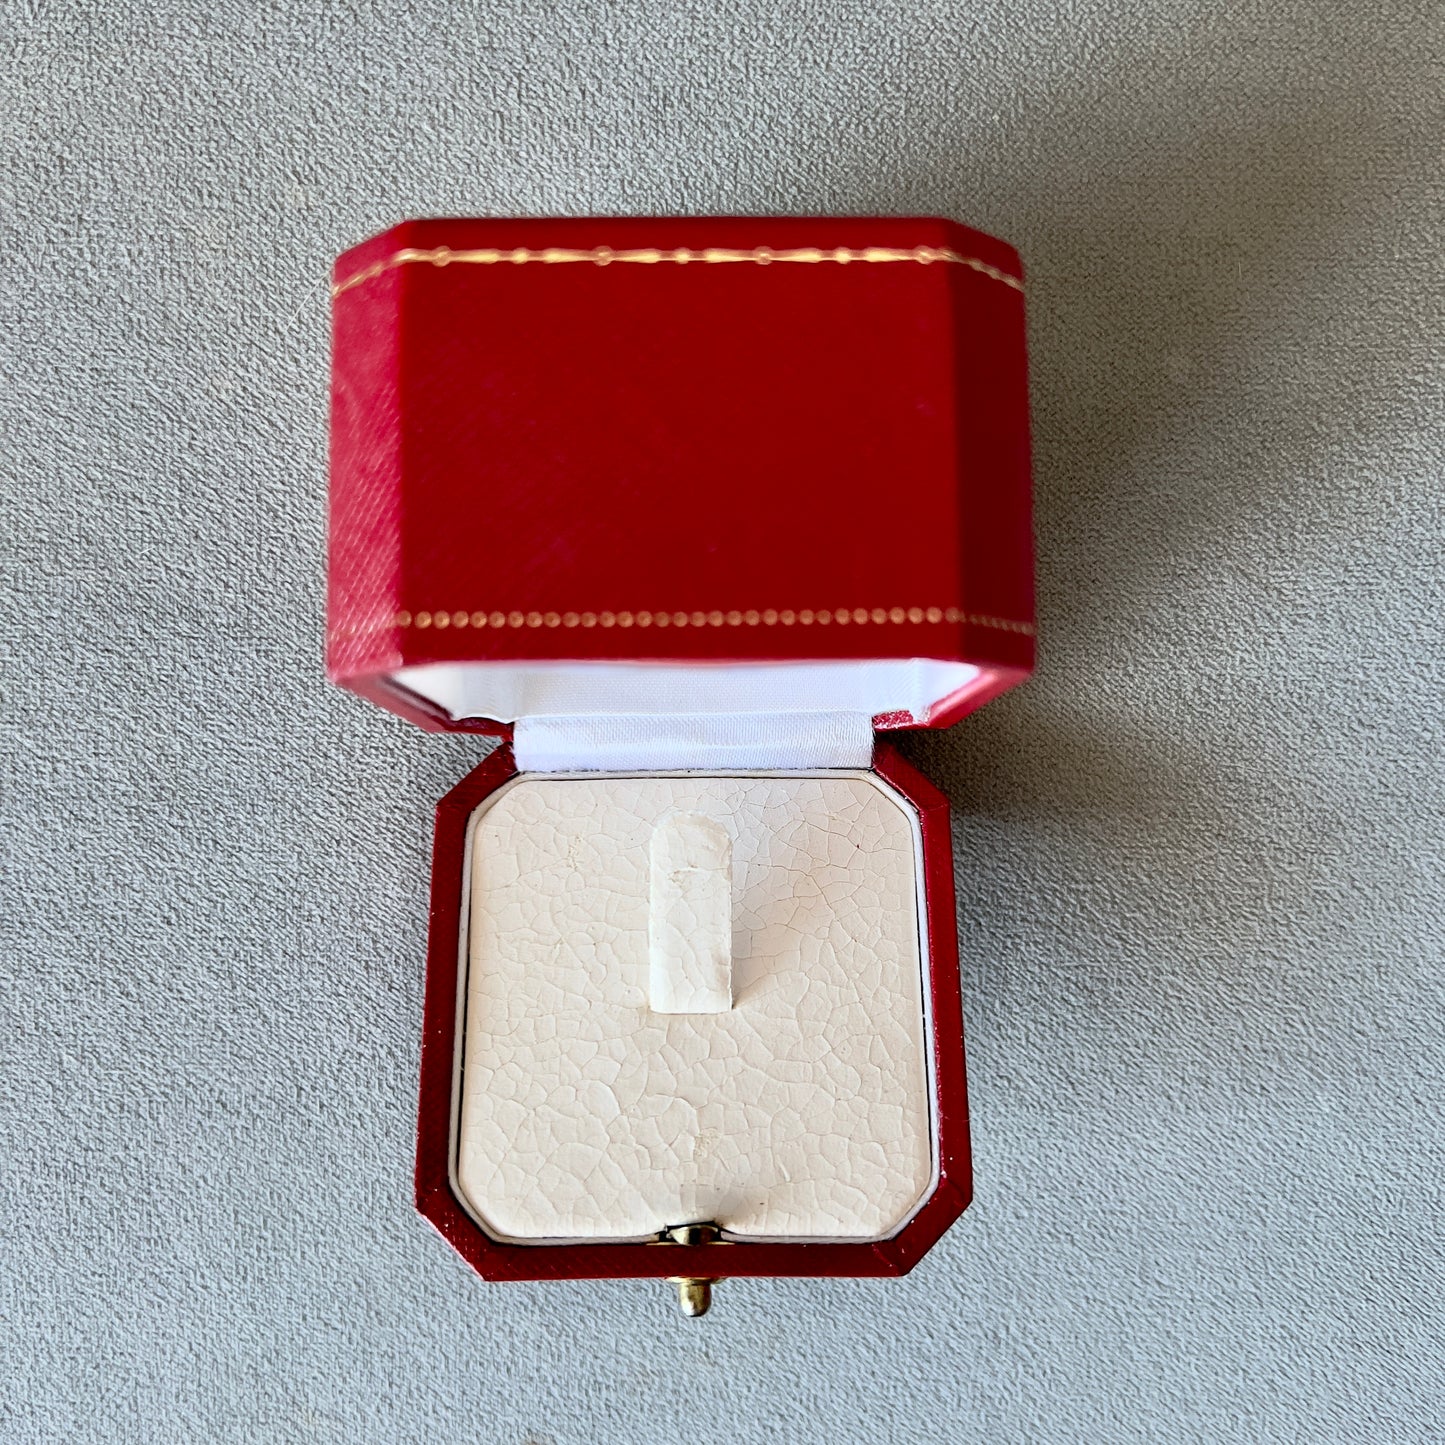 CARTIER Ring Pendant Box 2.35x2.35x2 inches